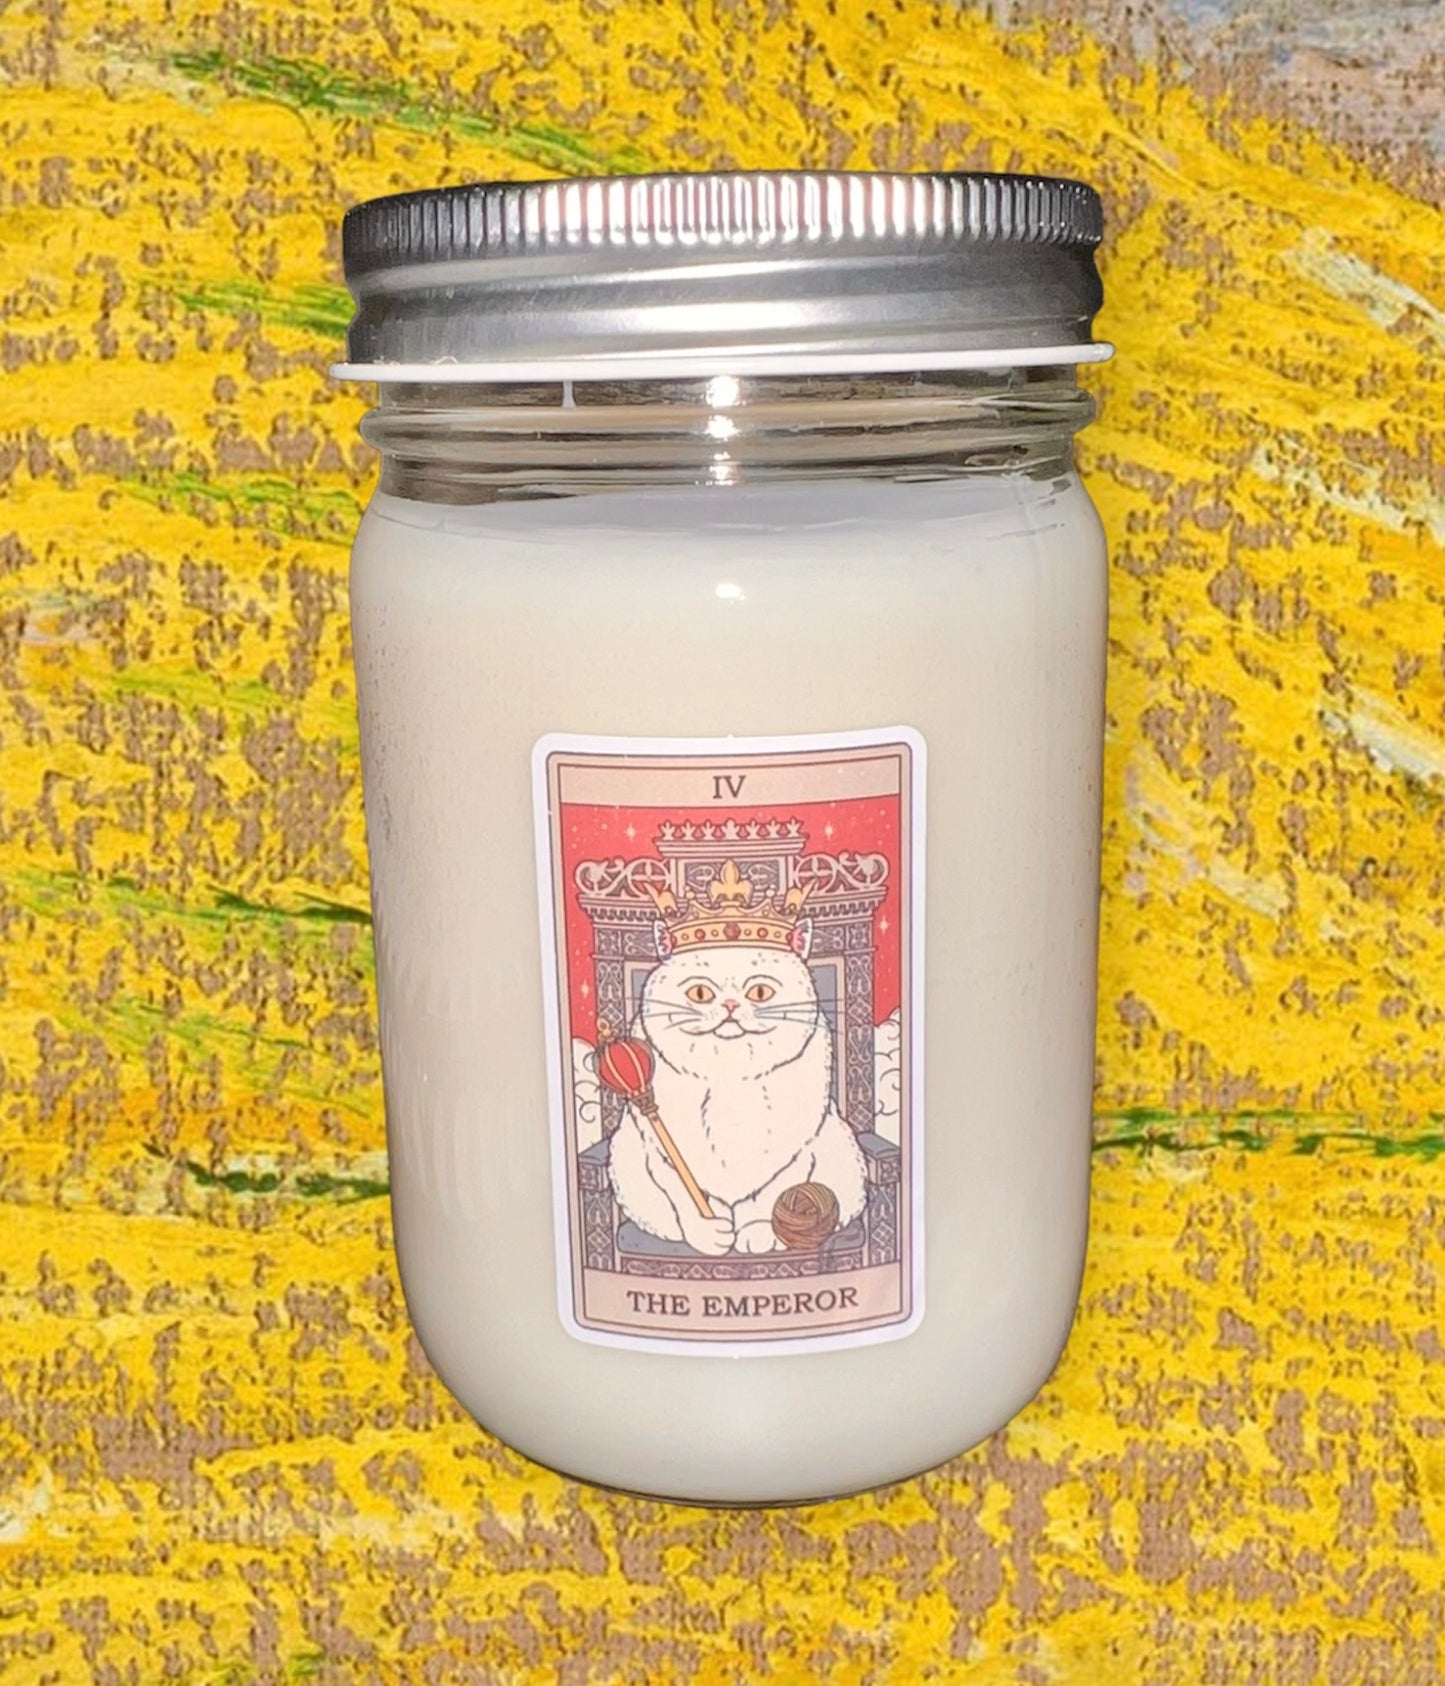 Buy metaphysical tarot card candles online. Scented soy-coco wax blends.